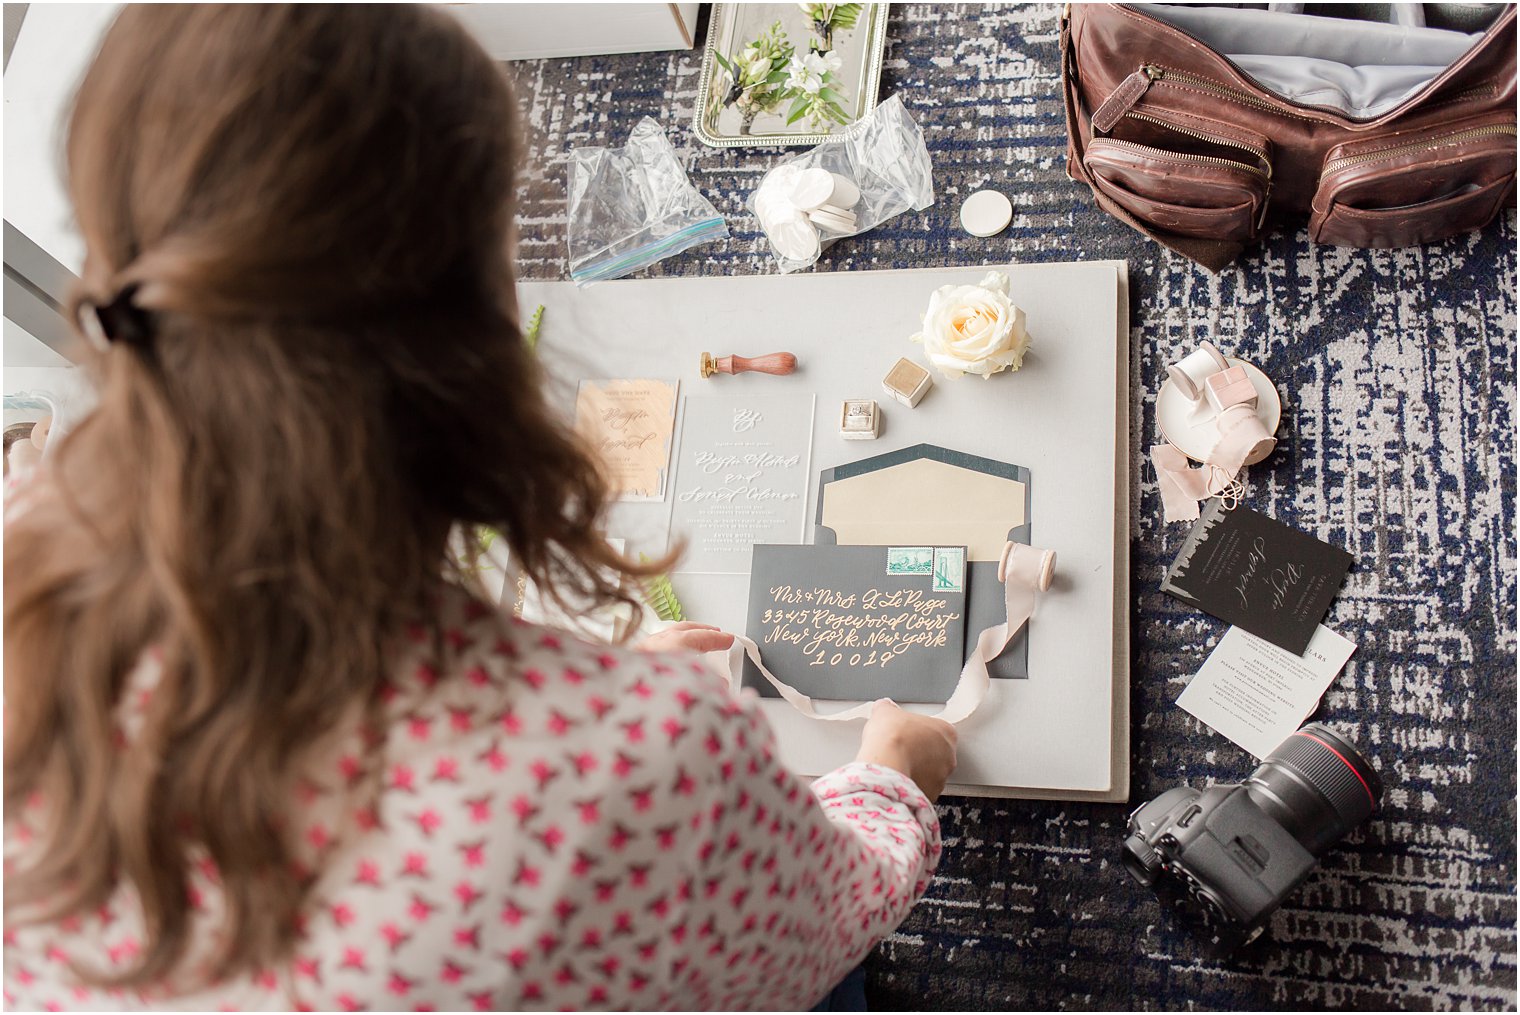 Behind-the-scenes photo of a wedding invitation flat lay